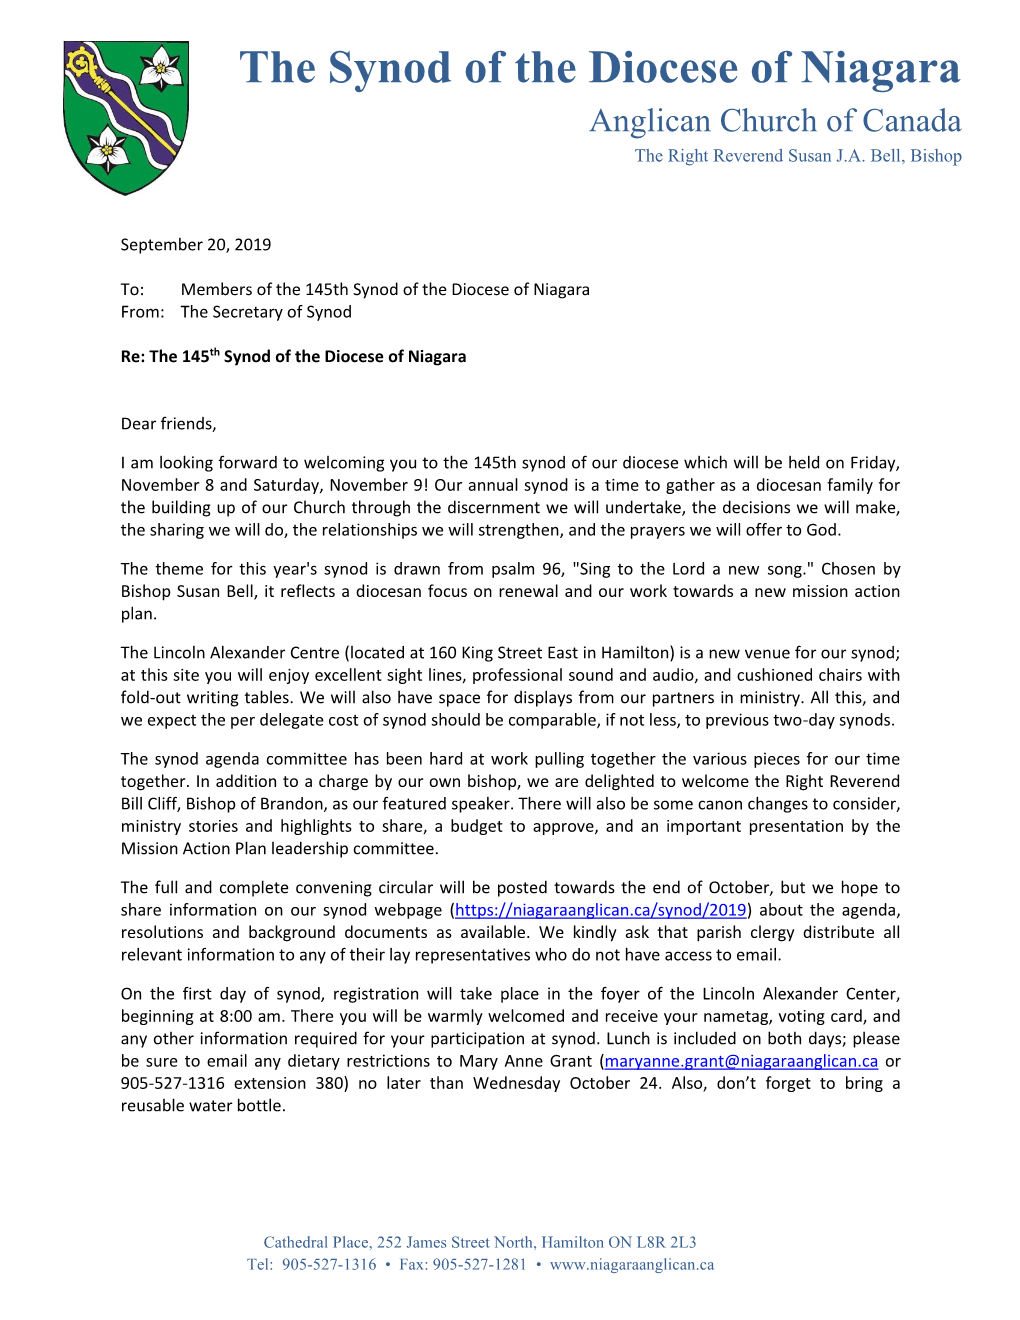 Secretary of Synod's Welcome Letter